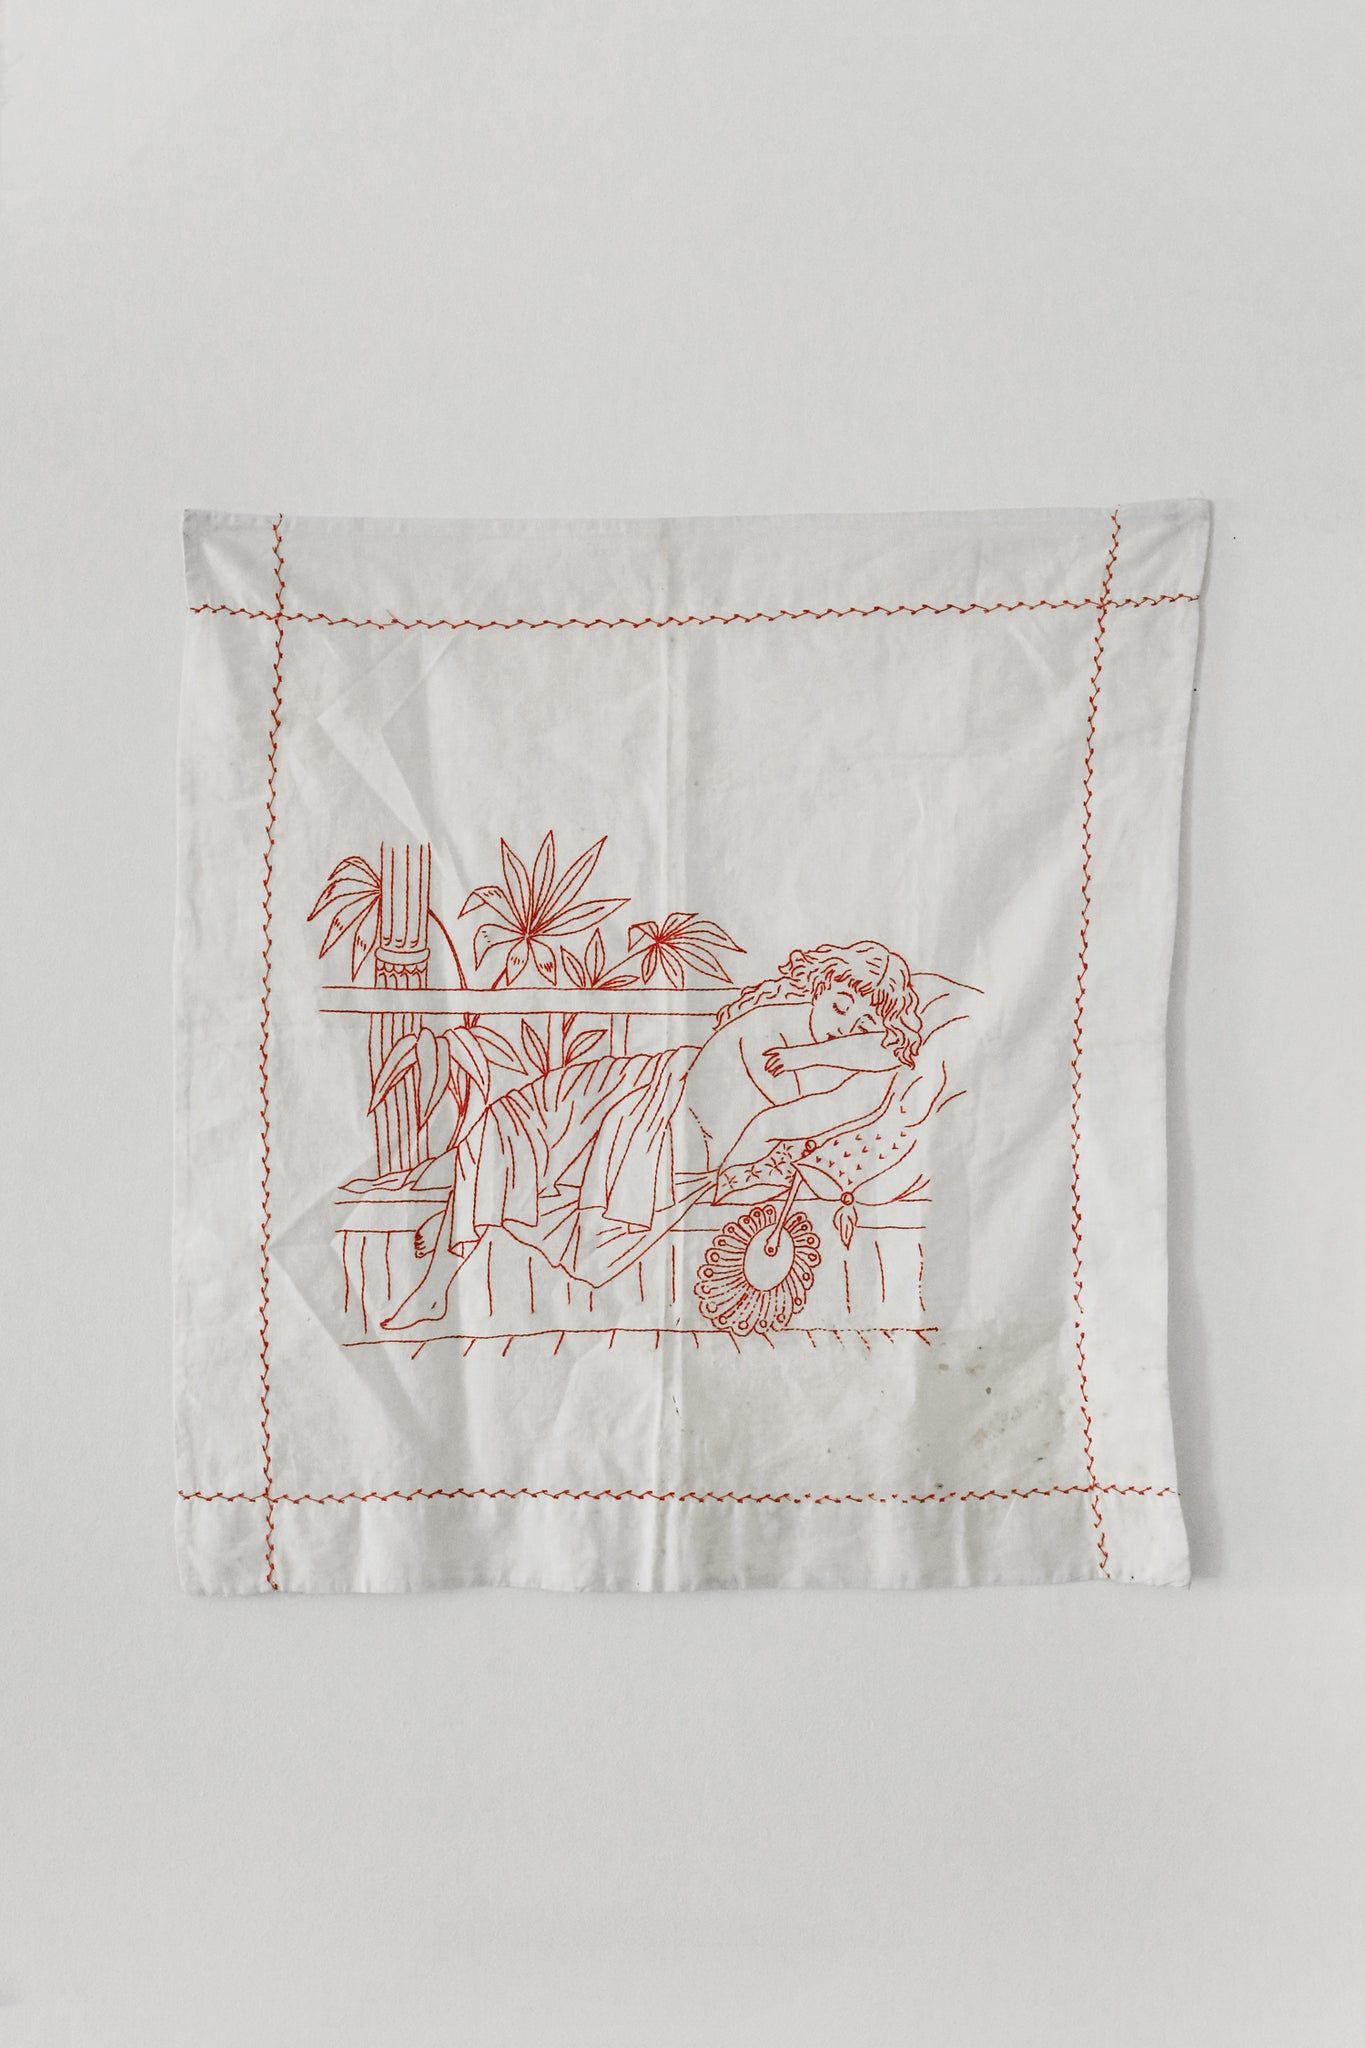 Hand-Stitched Tapestry, no. 1